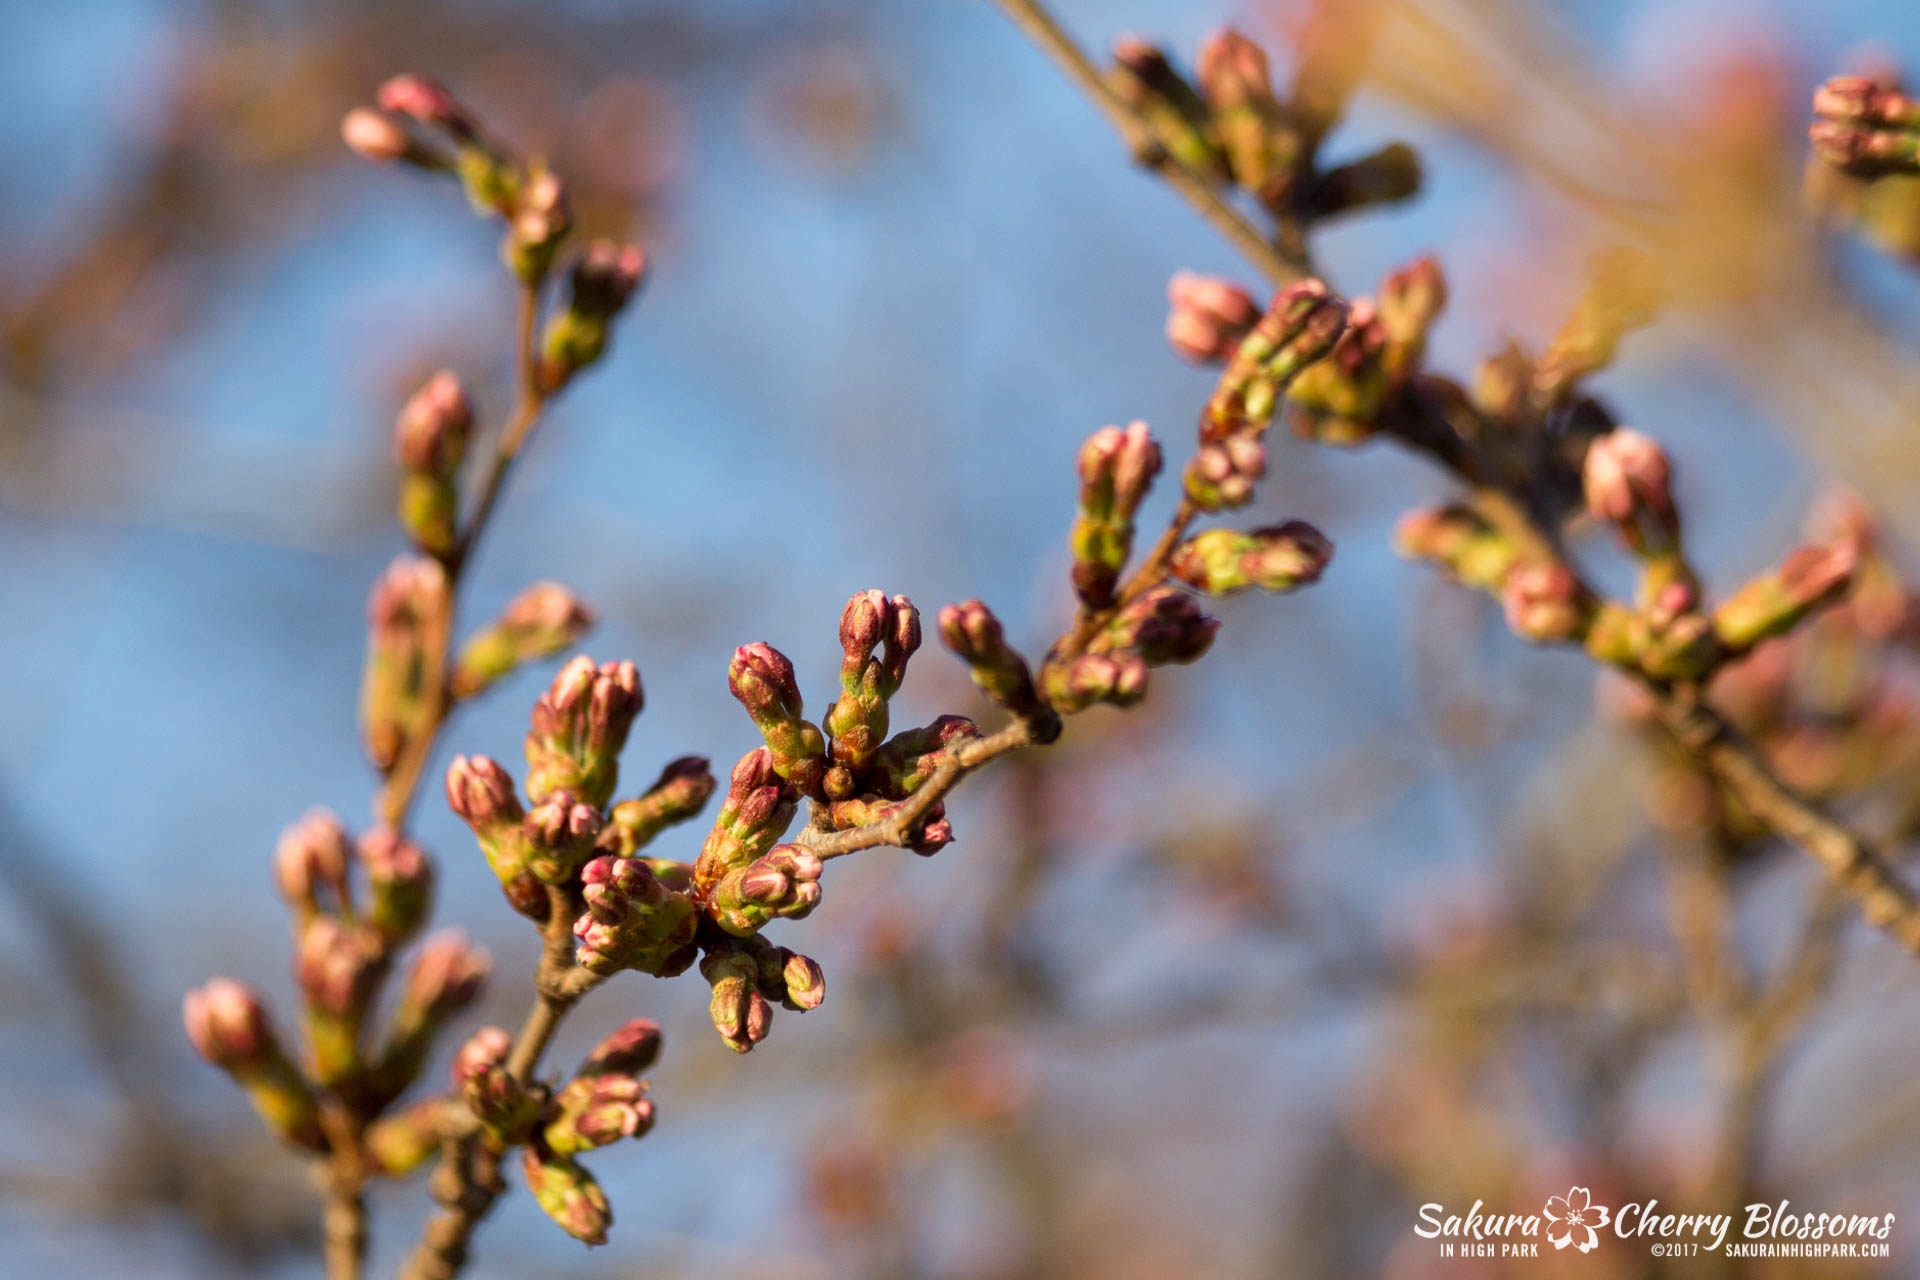 Sakura-in-High-Park-April-17-2017-florets-are-emerging-from-the-buds-throughout-the-park-63.jpg